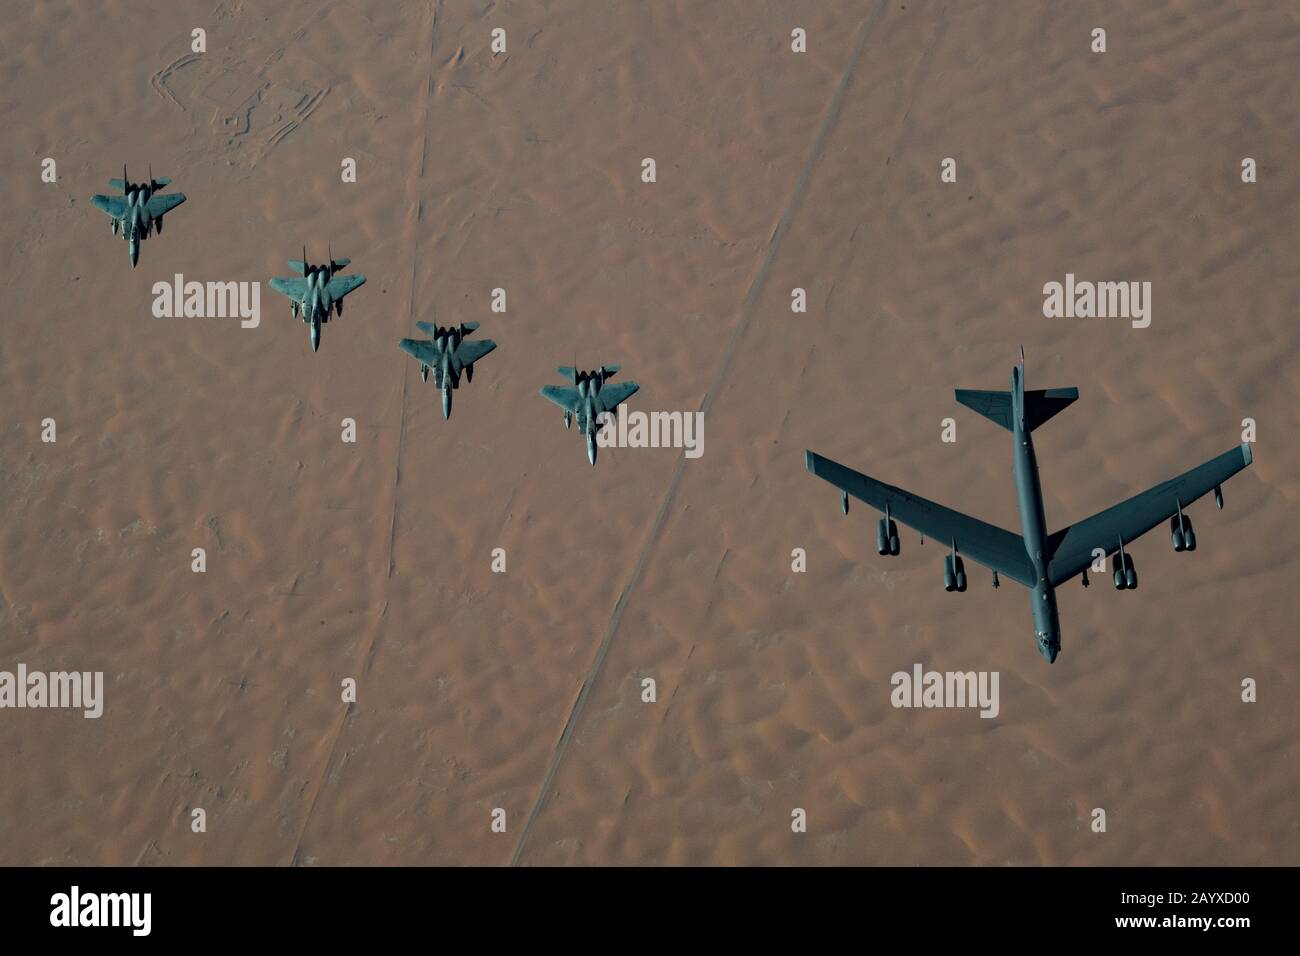 A U.S. Air Force B-52H Stratofortress strategic bomber accompanied by four Saudi Arabian F-15C Eagle fighter jets, conducts a low pass over Prince Sultan Air Base November 1, 2019 in Al Kharj, Saudi Arabia. Stock Photo